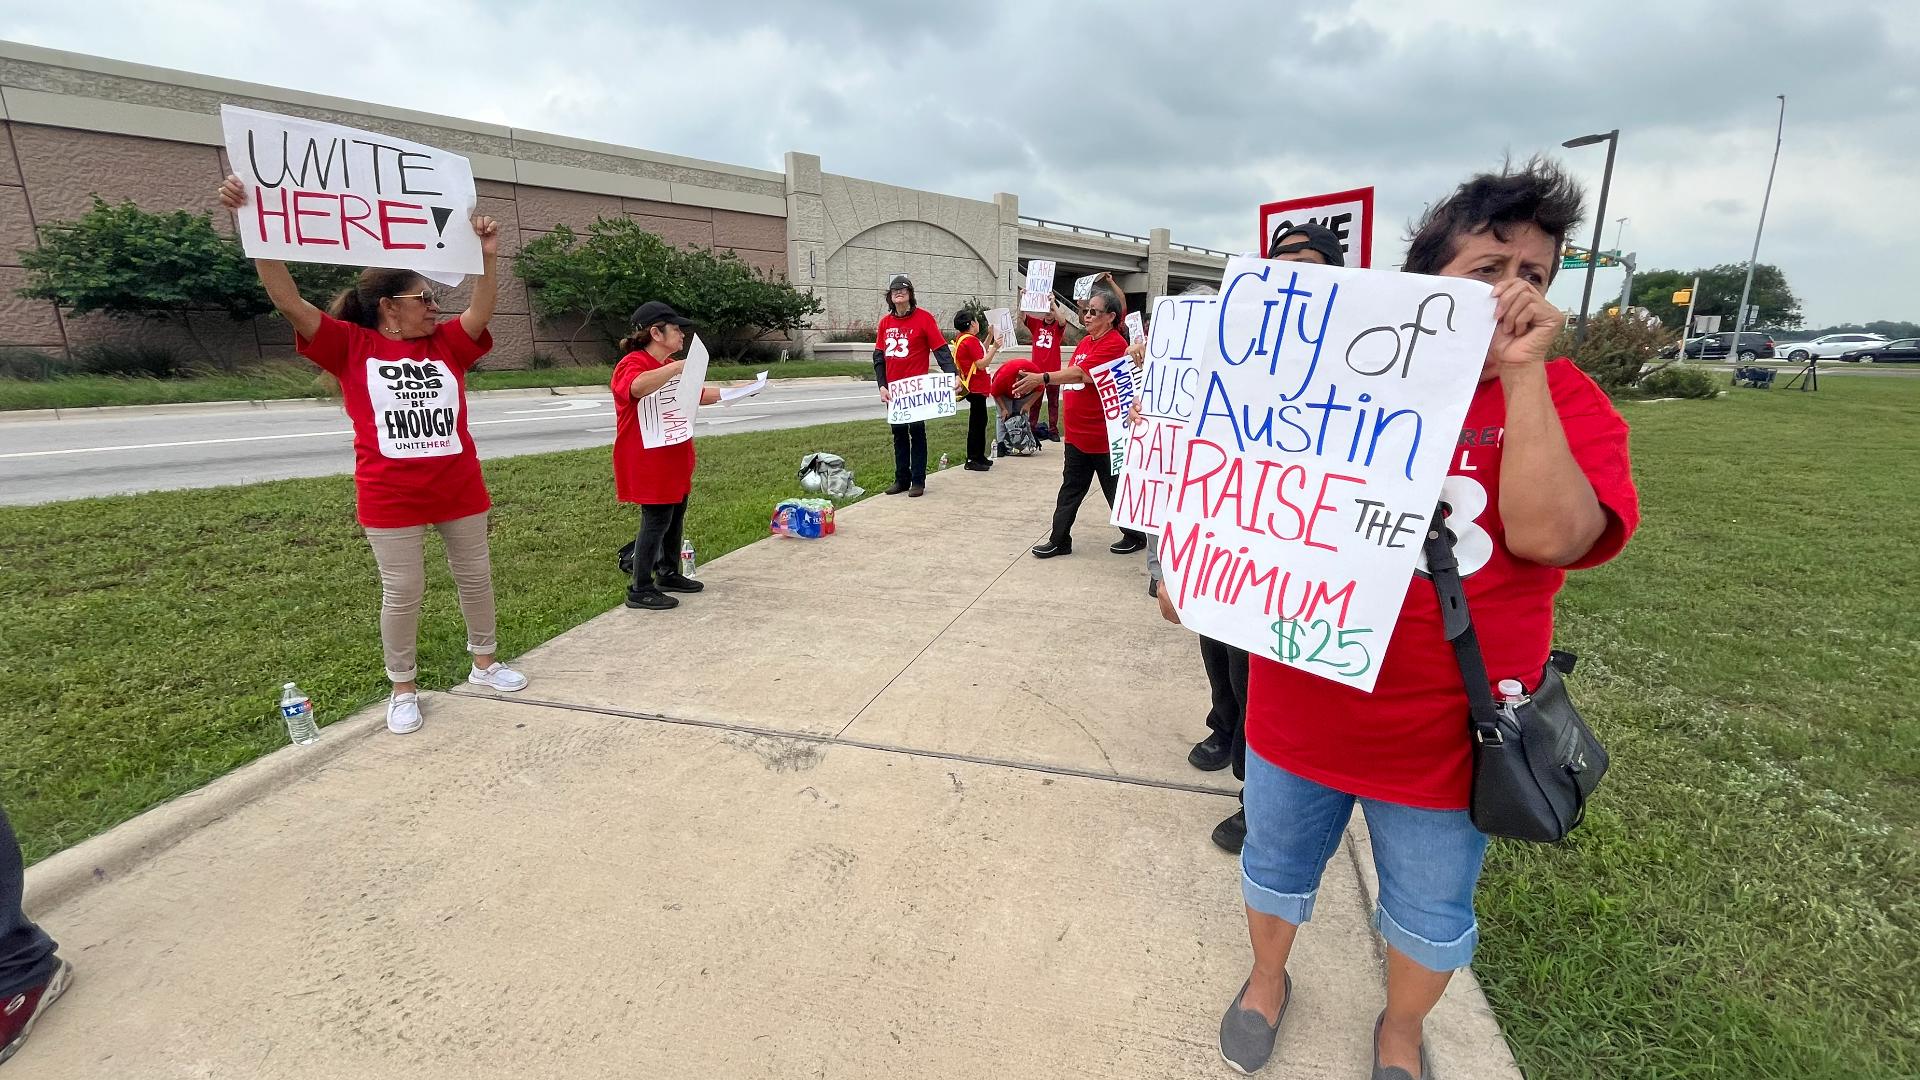 Food service and hospitality workers employed at Austin's airport through Delaware North picketed for a $25 per hour minimum wage.